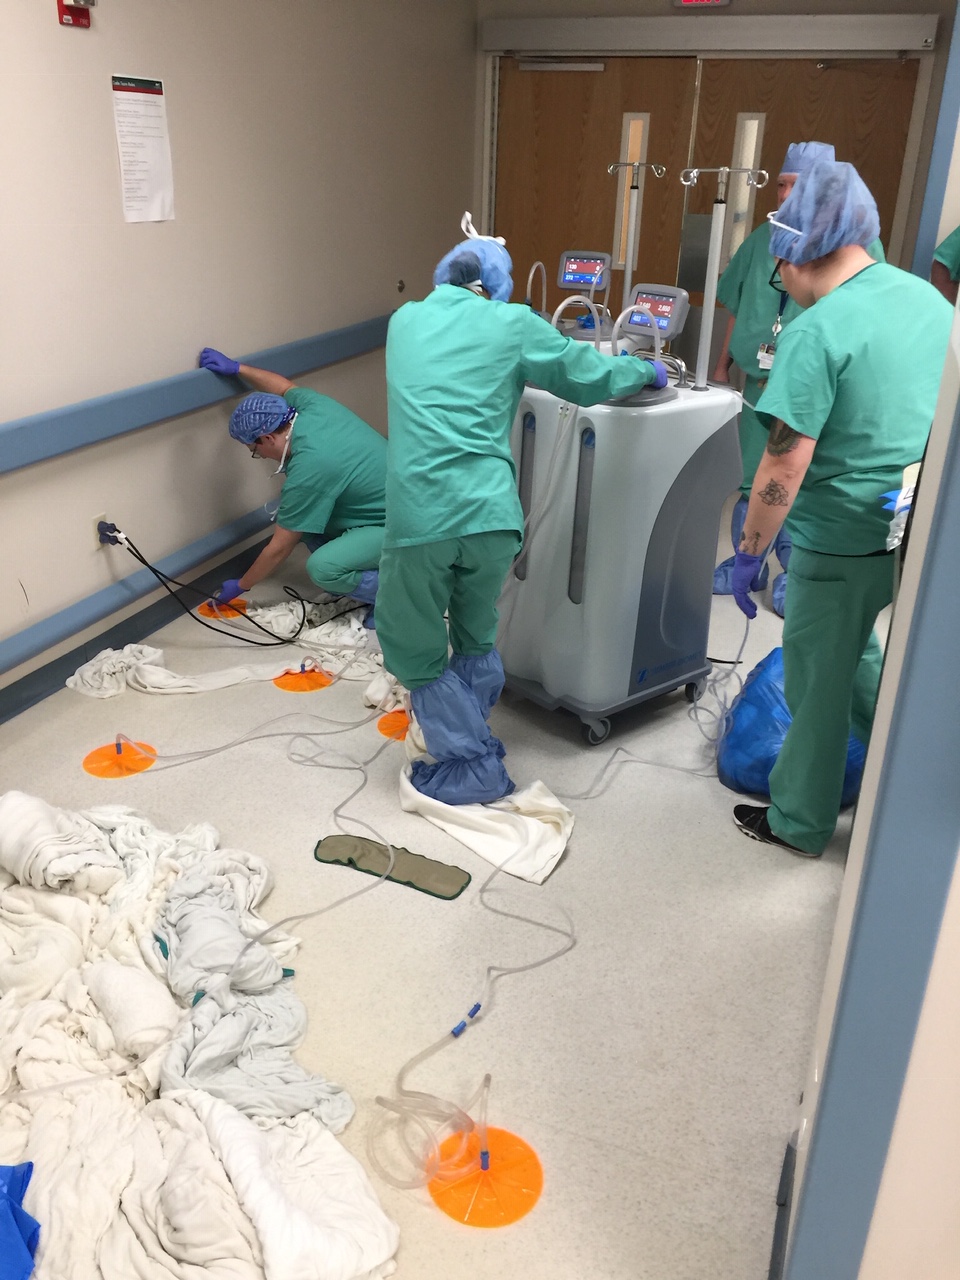 Hospital staff cleaning up hallway after earthquake